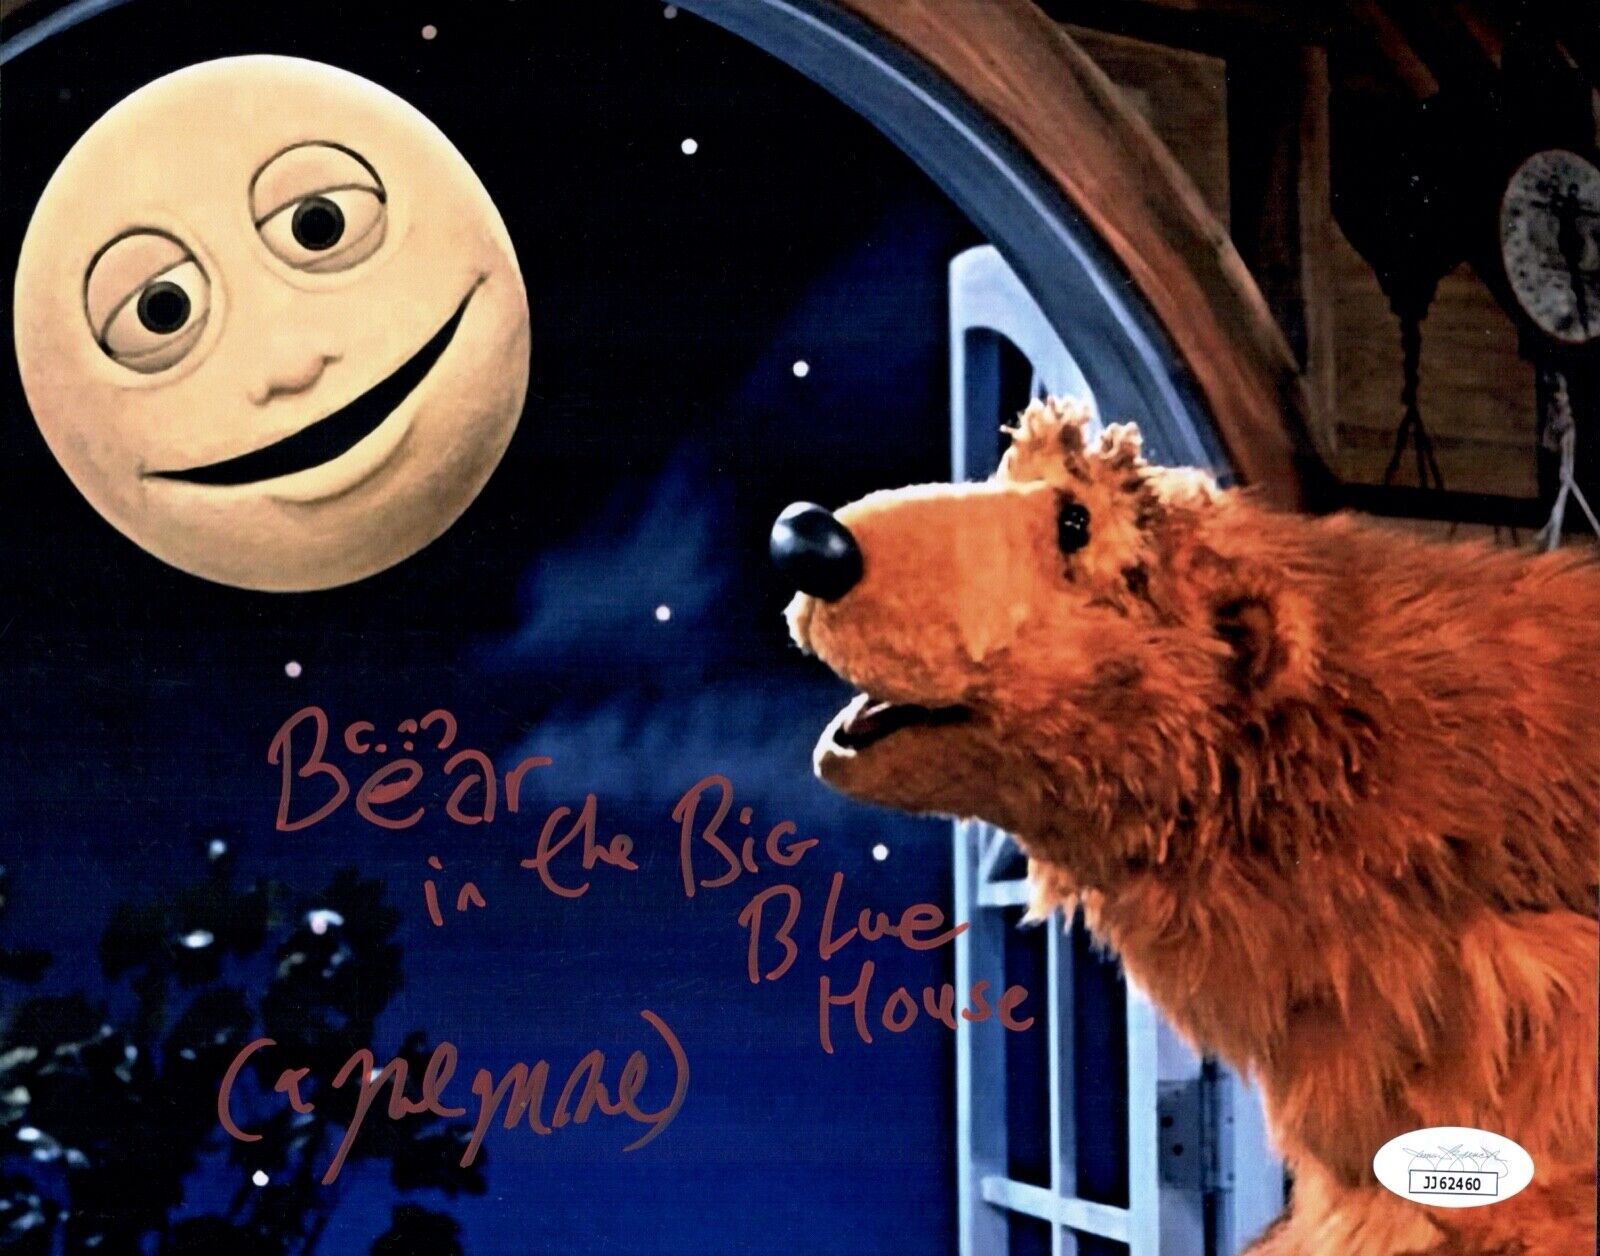 NOEL MACNEAL Signed BEAR IN THE BIG BLUE HOUSE 8x10 Photo Poster painting Autograph JSA COA Cert